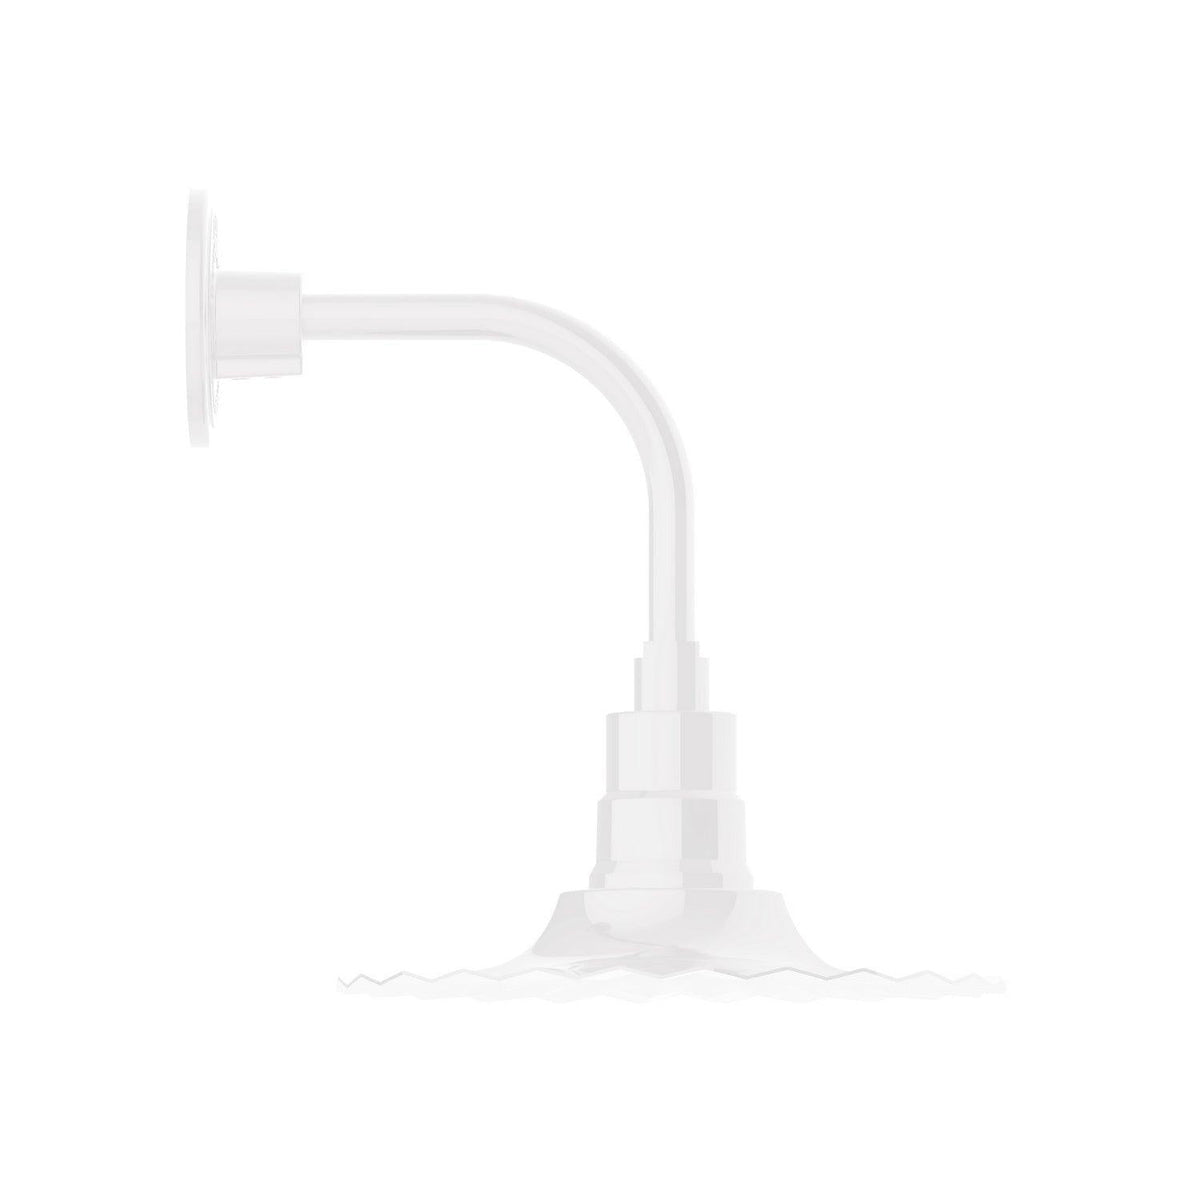 Montclair Light Works - Radial 12" Curved Arm Wall Light - GNT158-44 | Montreal Lighting & Hardware